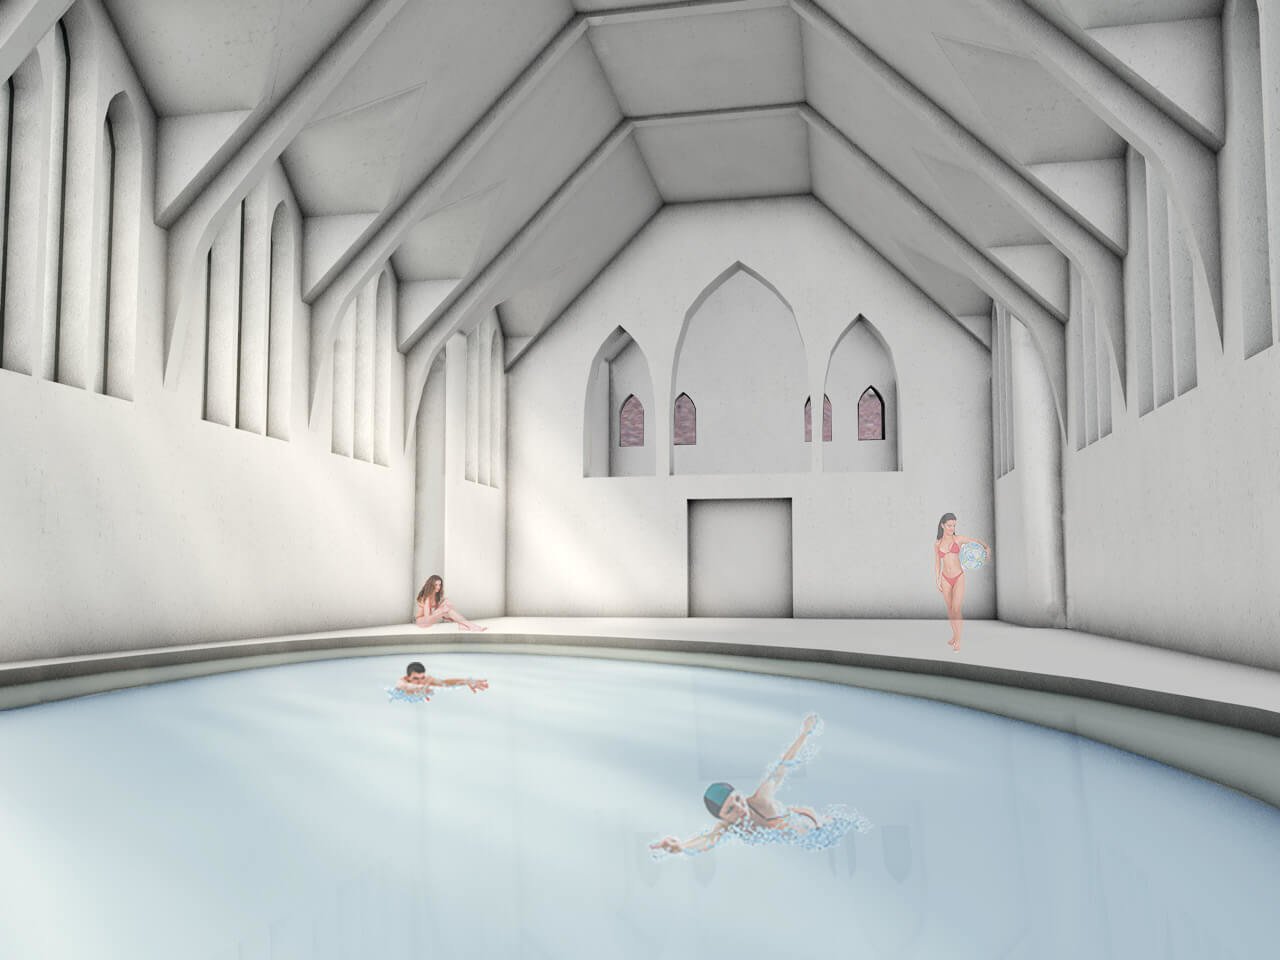 Liong Lie architects Castle Gemert interior chapel with swimming pool